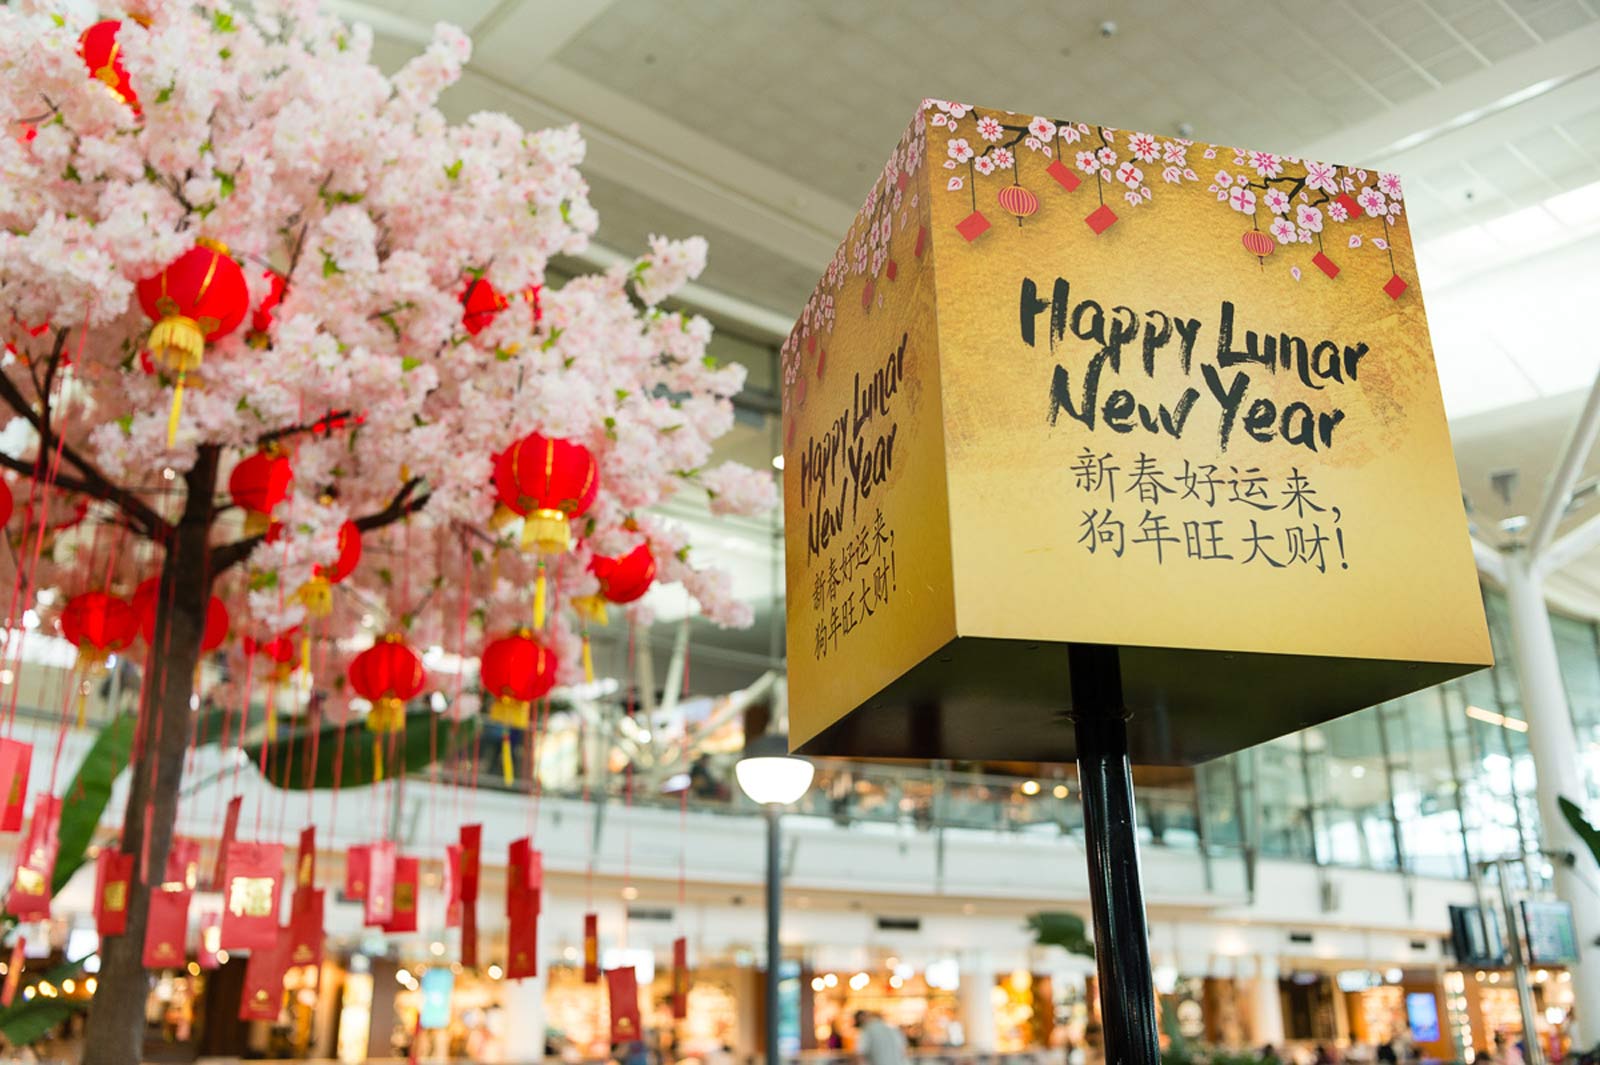 Lunar New Year celebrations in the International Terminal